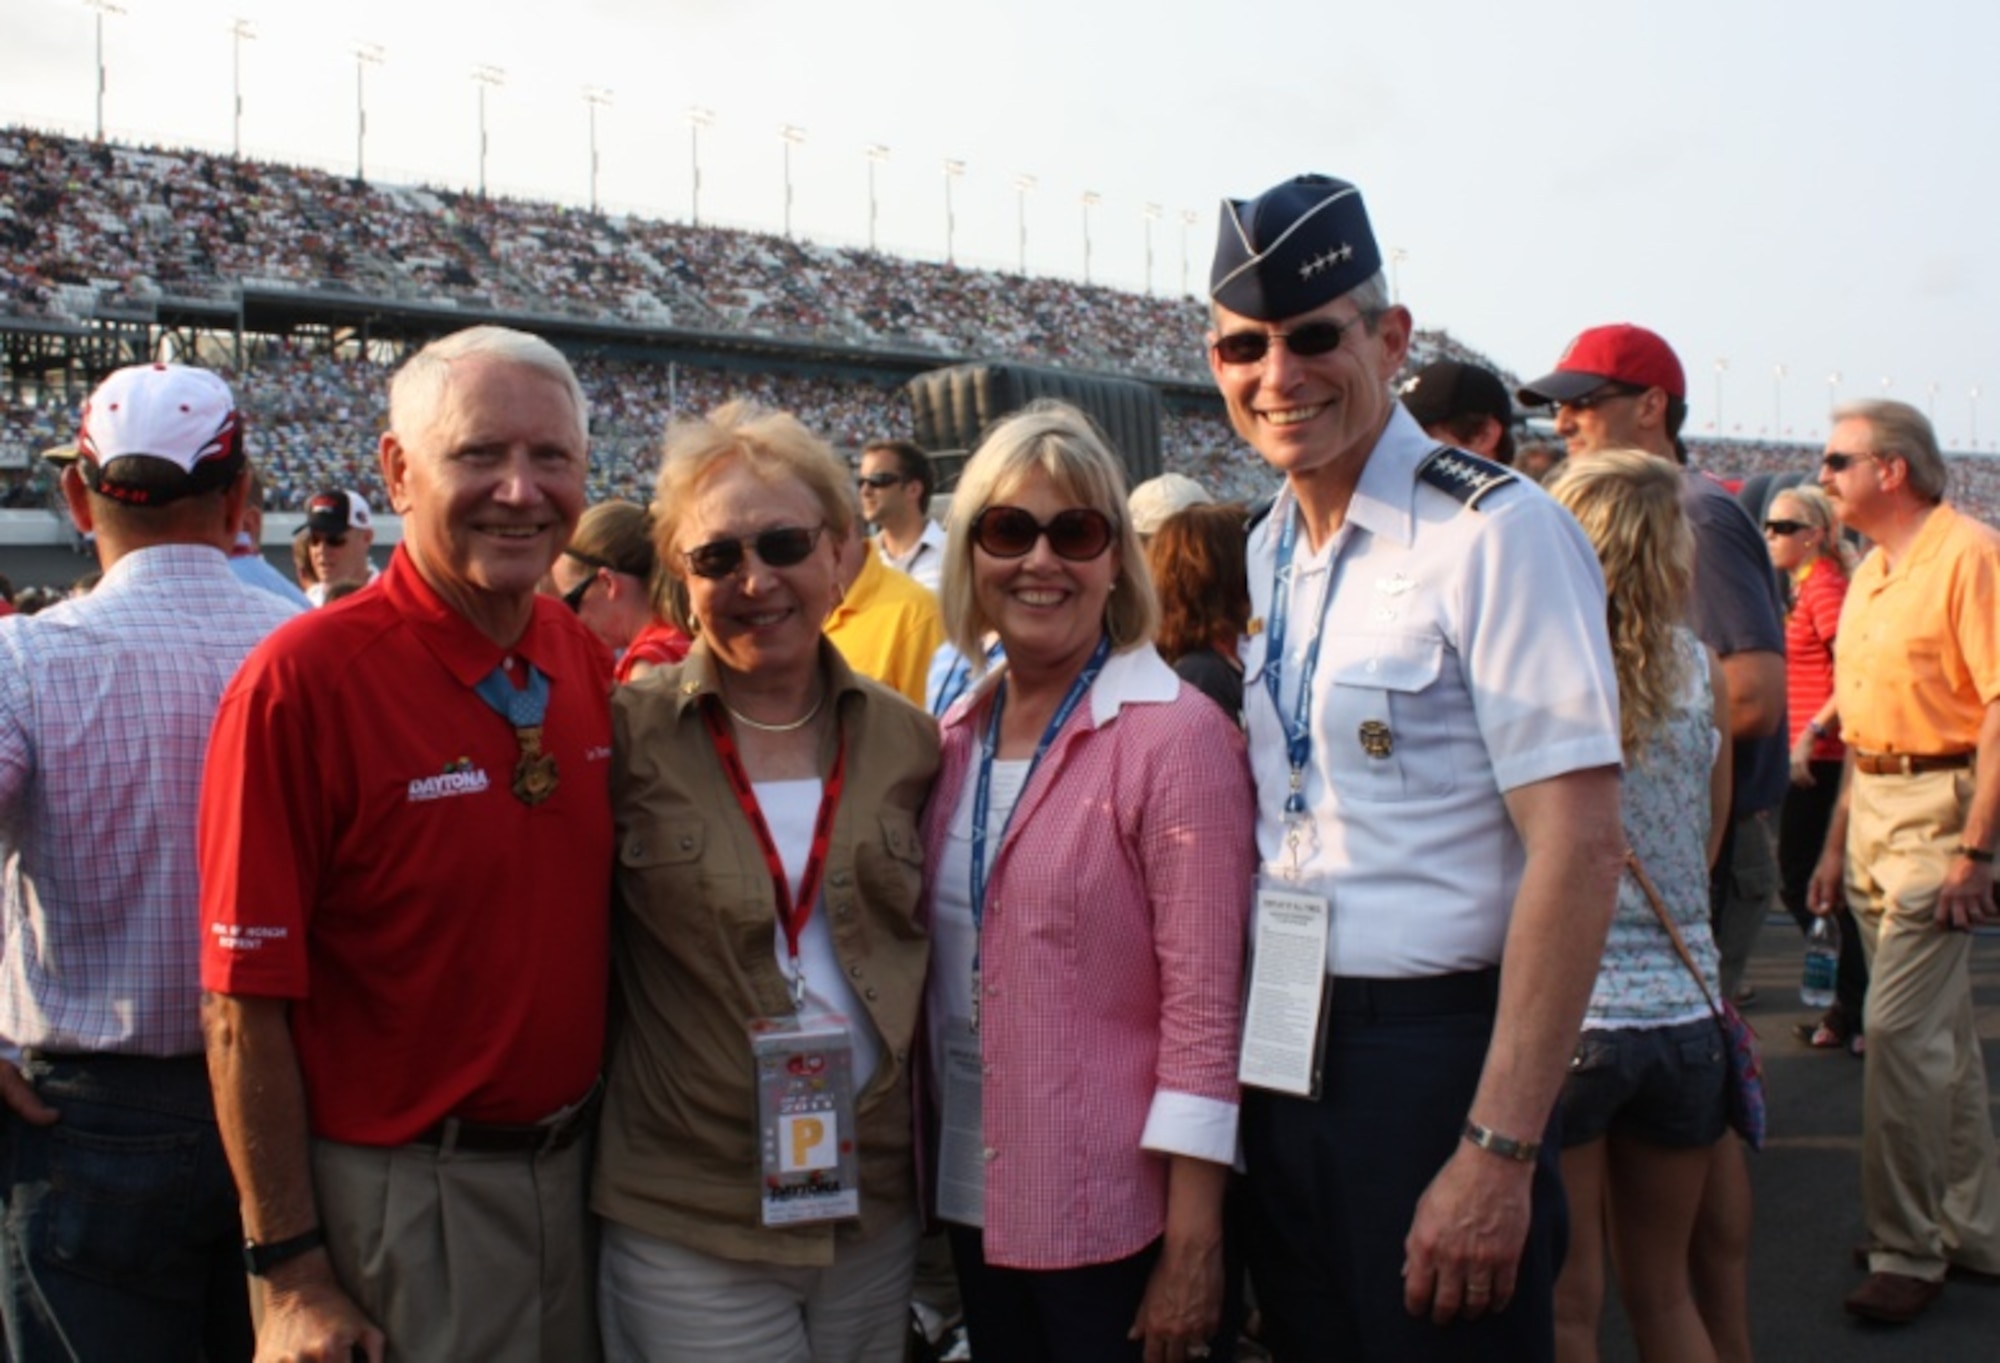 Air Force Chief of Staff Gen. Norton Schwartz and his wife Suzie (second from right) pose for a photo with retired Col. Leo Thorsness and his wife Gaylee.  Colonel Thorsness was among many Medal of Honor recipients recognized during the opening ceremonies July 2, 2011, at the Coke Zero 400 in Daytona Beach, Fla. (U.S. Air Force photo/Capt. Maggie M. Silva)